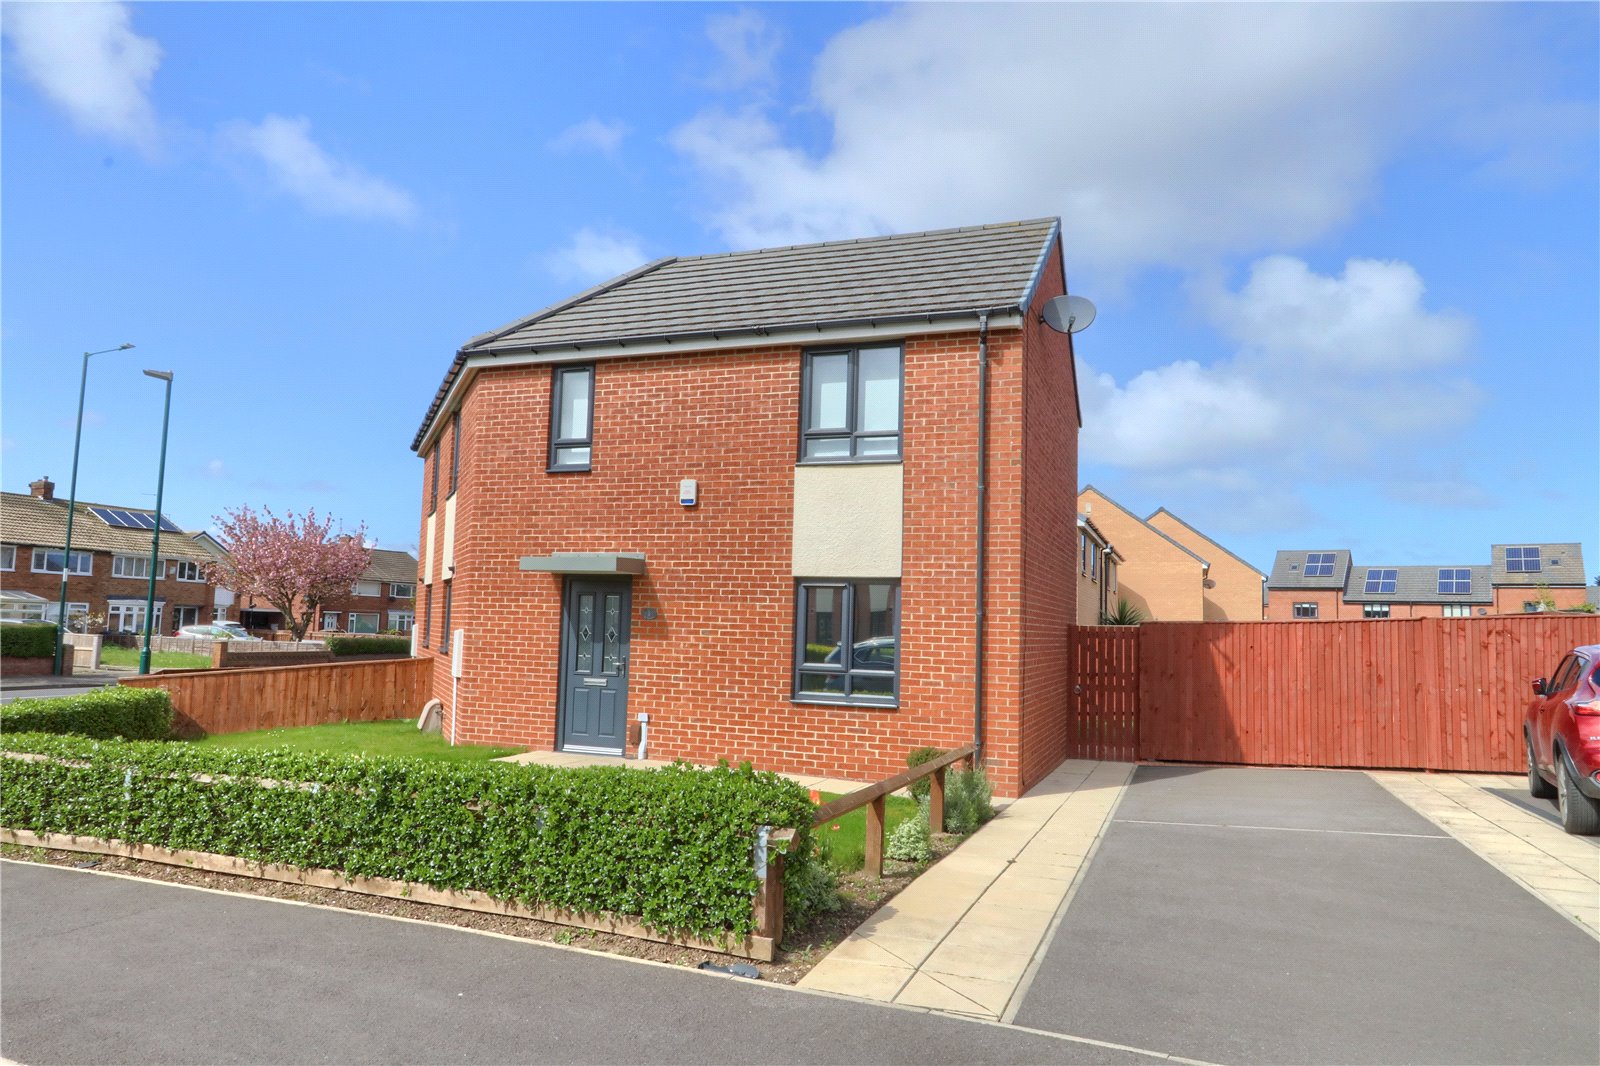 3 bed house for sale in The Meadows, Redcar - Property Image 1